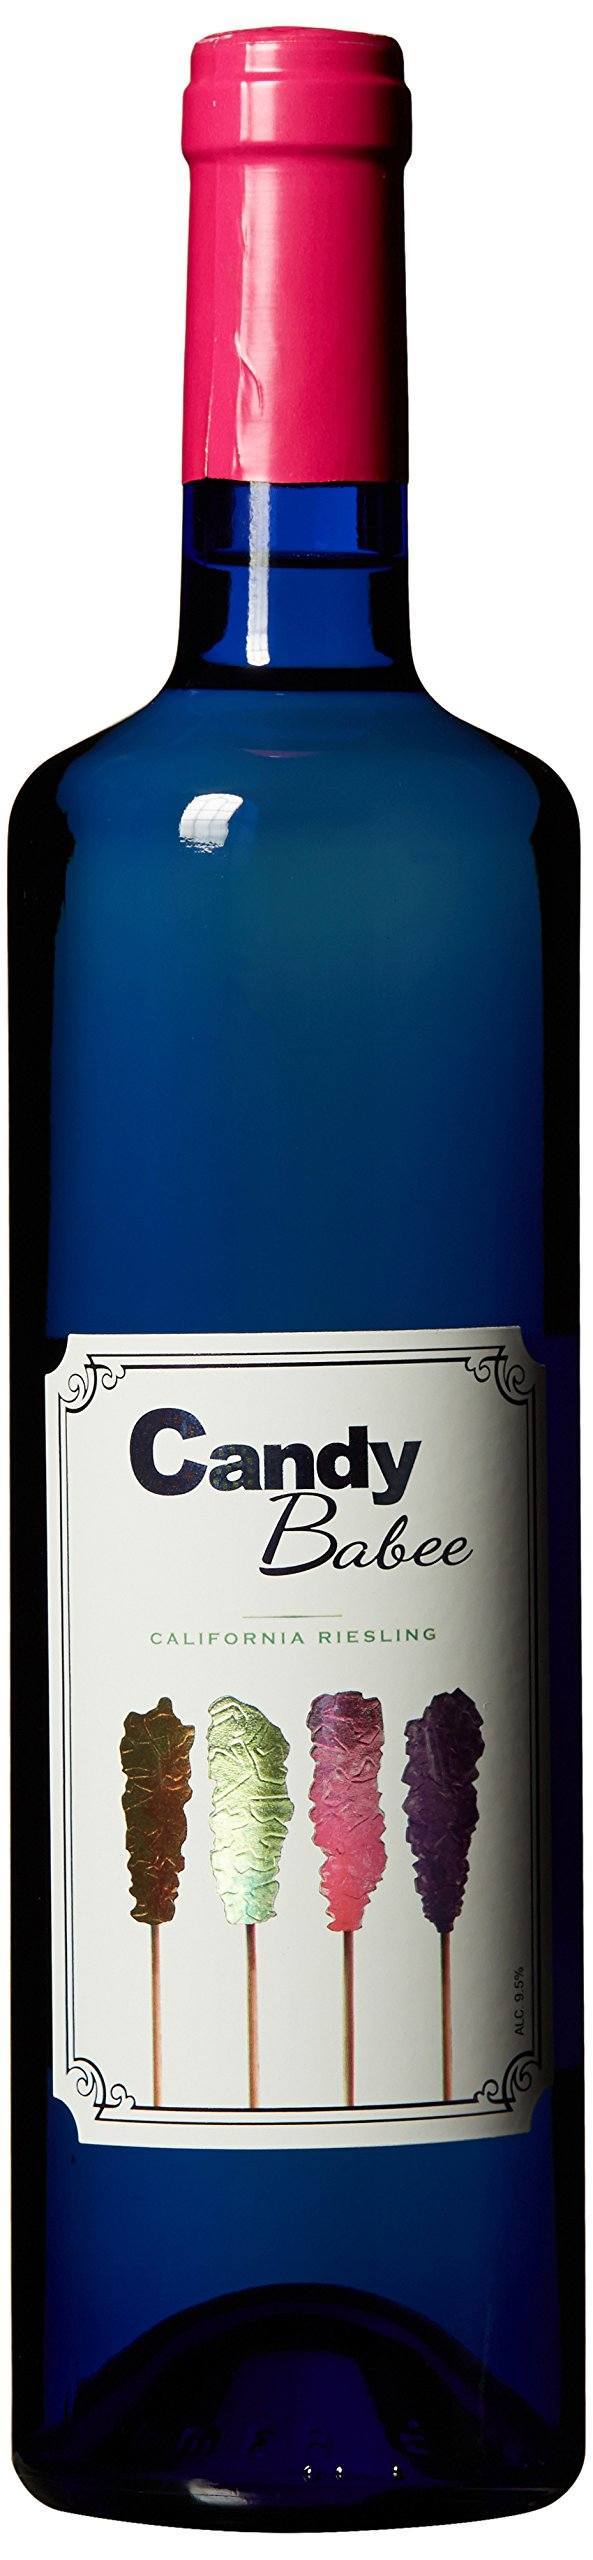 NV Candy Babee California Riesling Wine